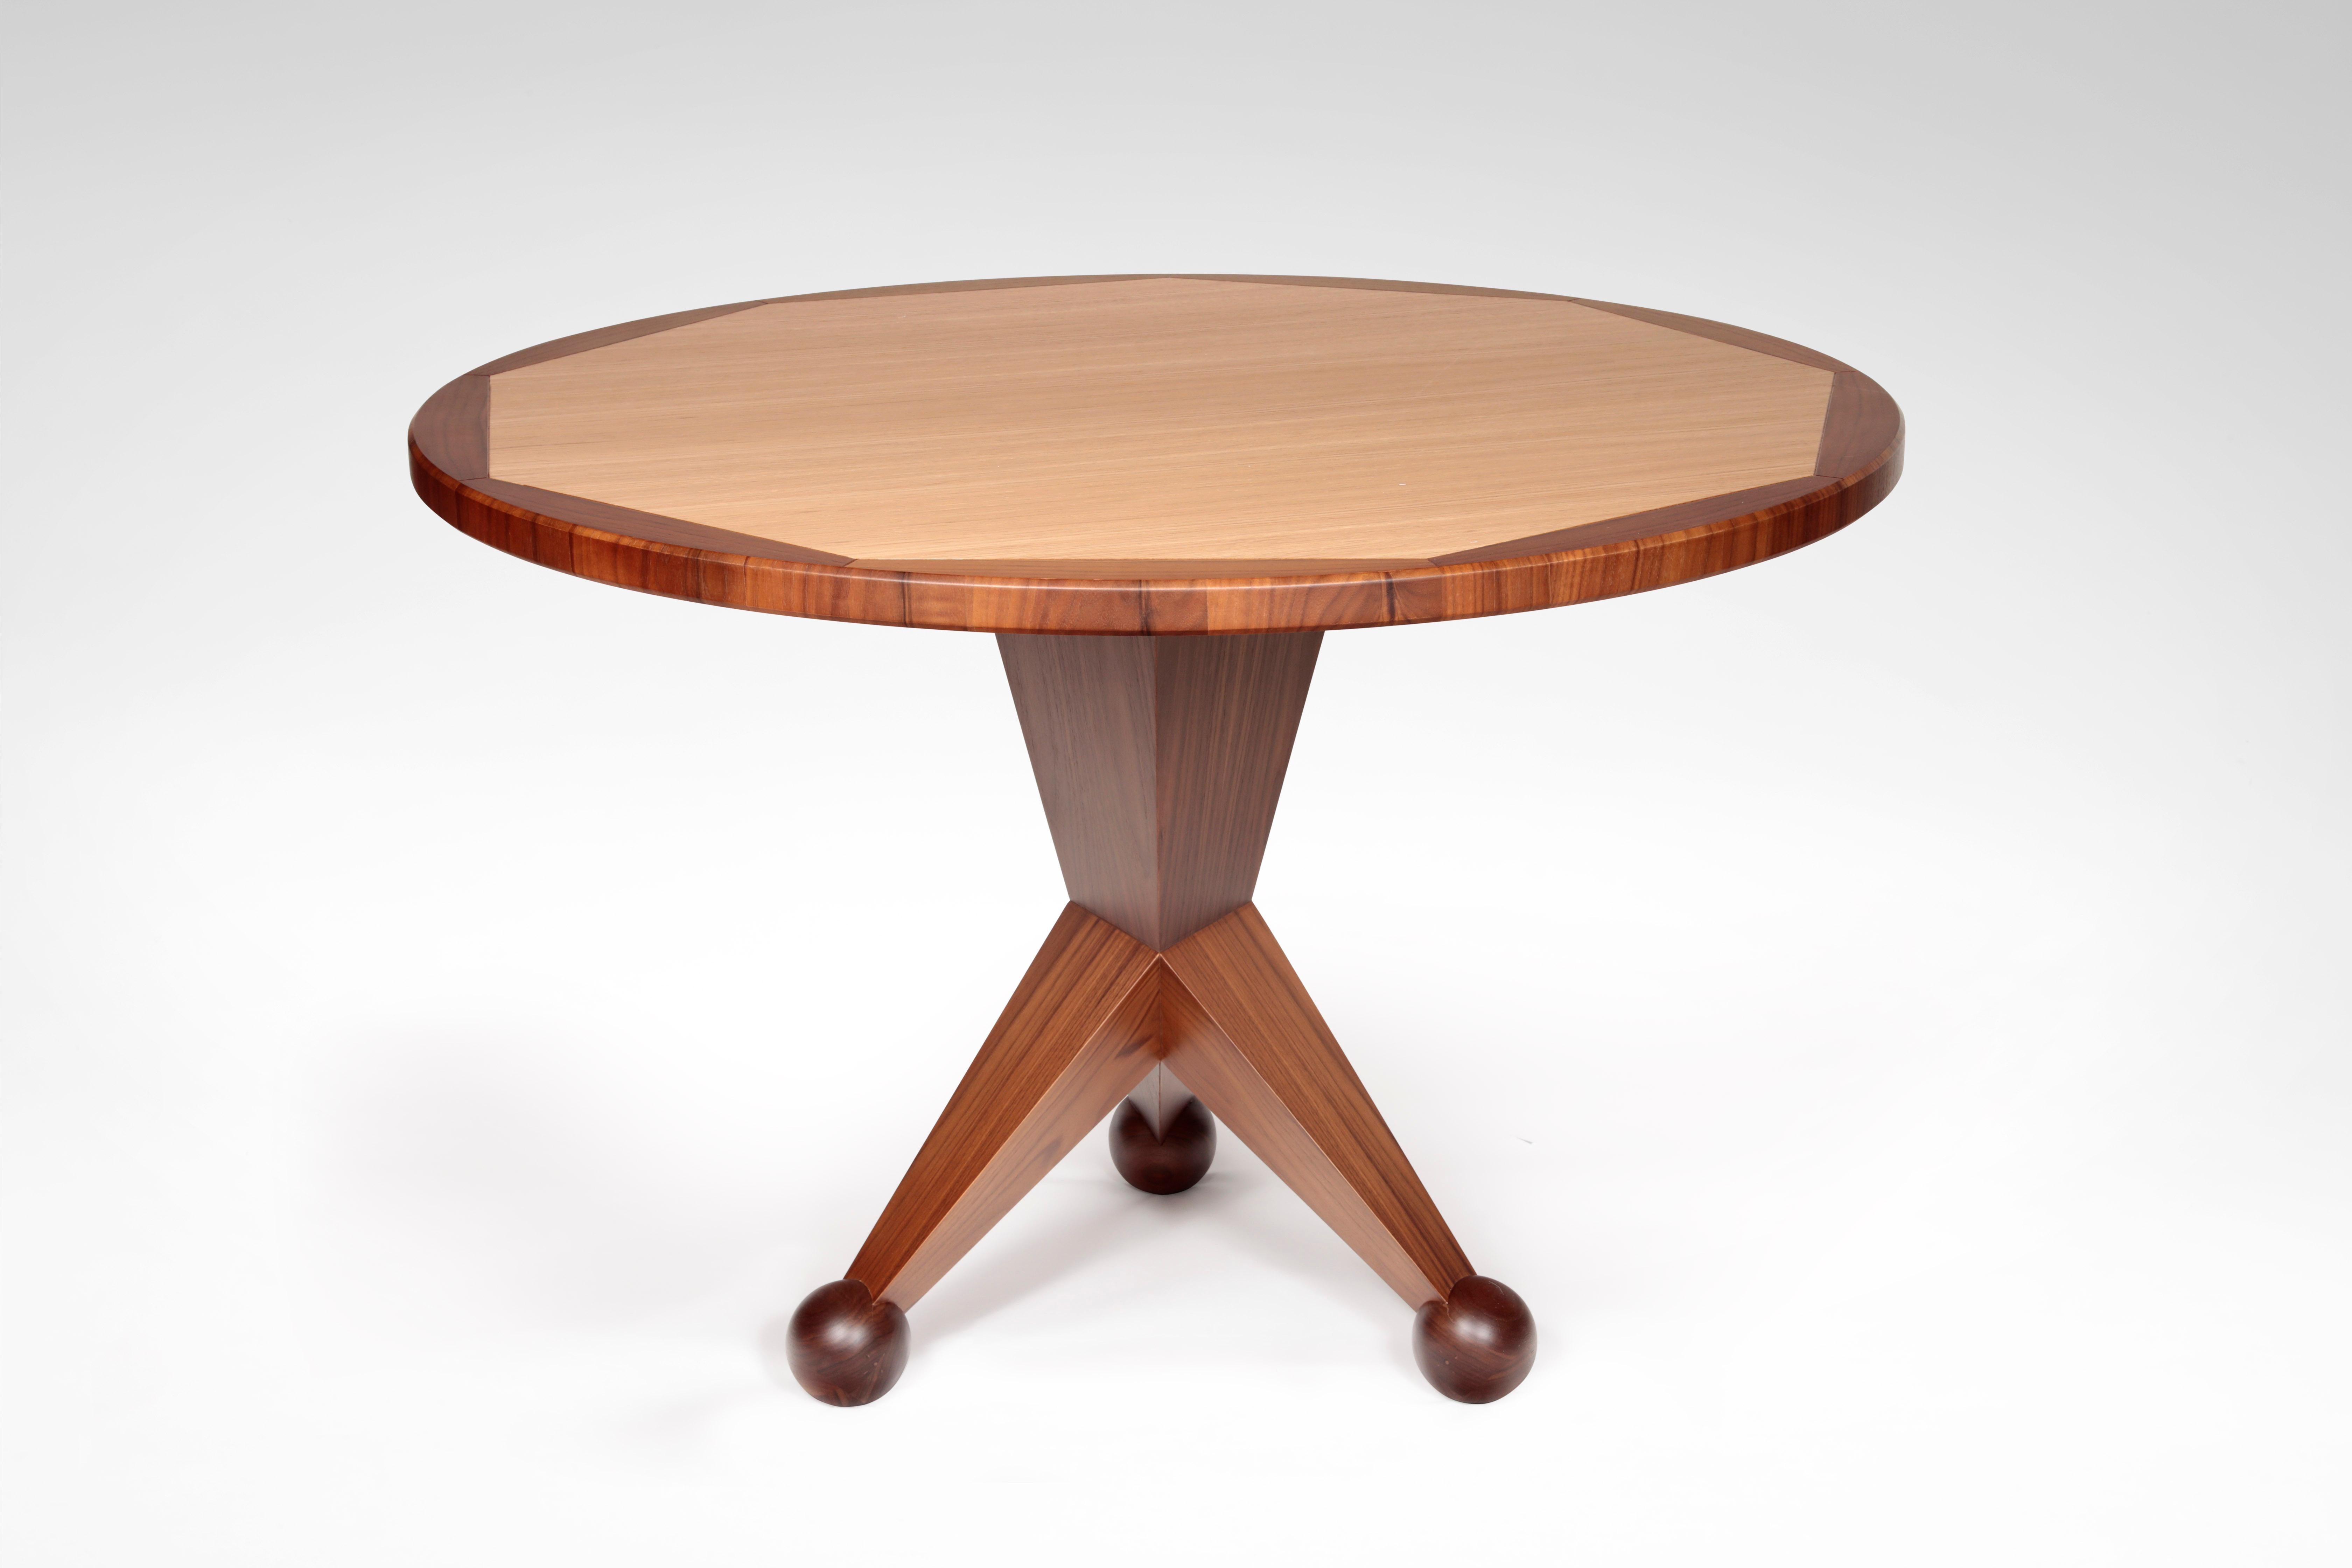 Contemporary Octogonal Solid Oak Triptych Leg Table from Laura Gonzalez Collection